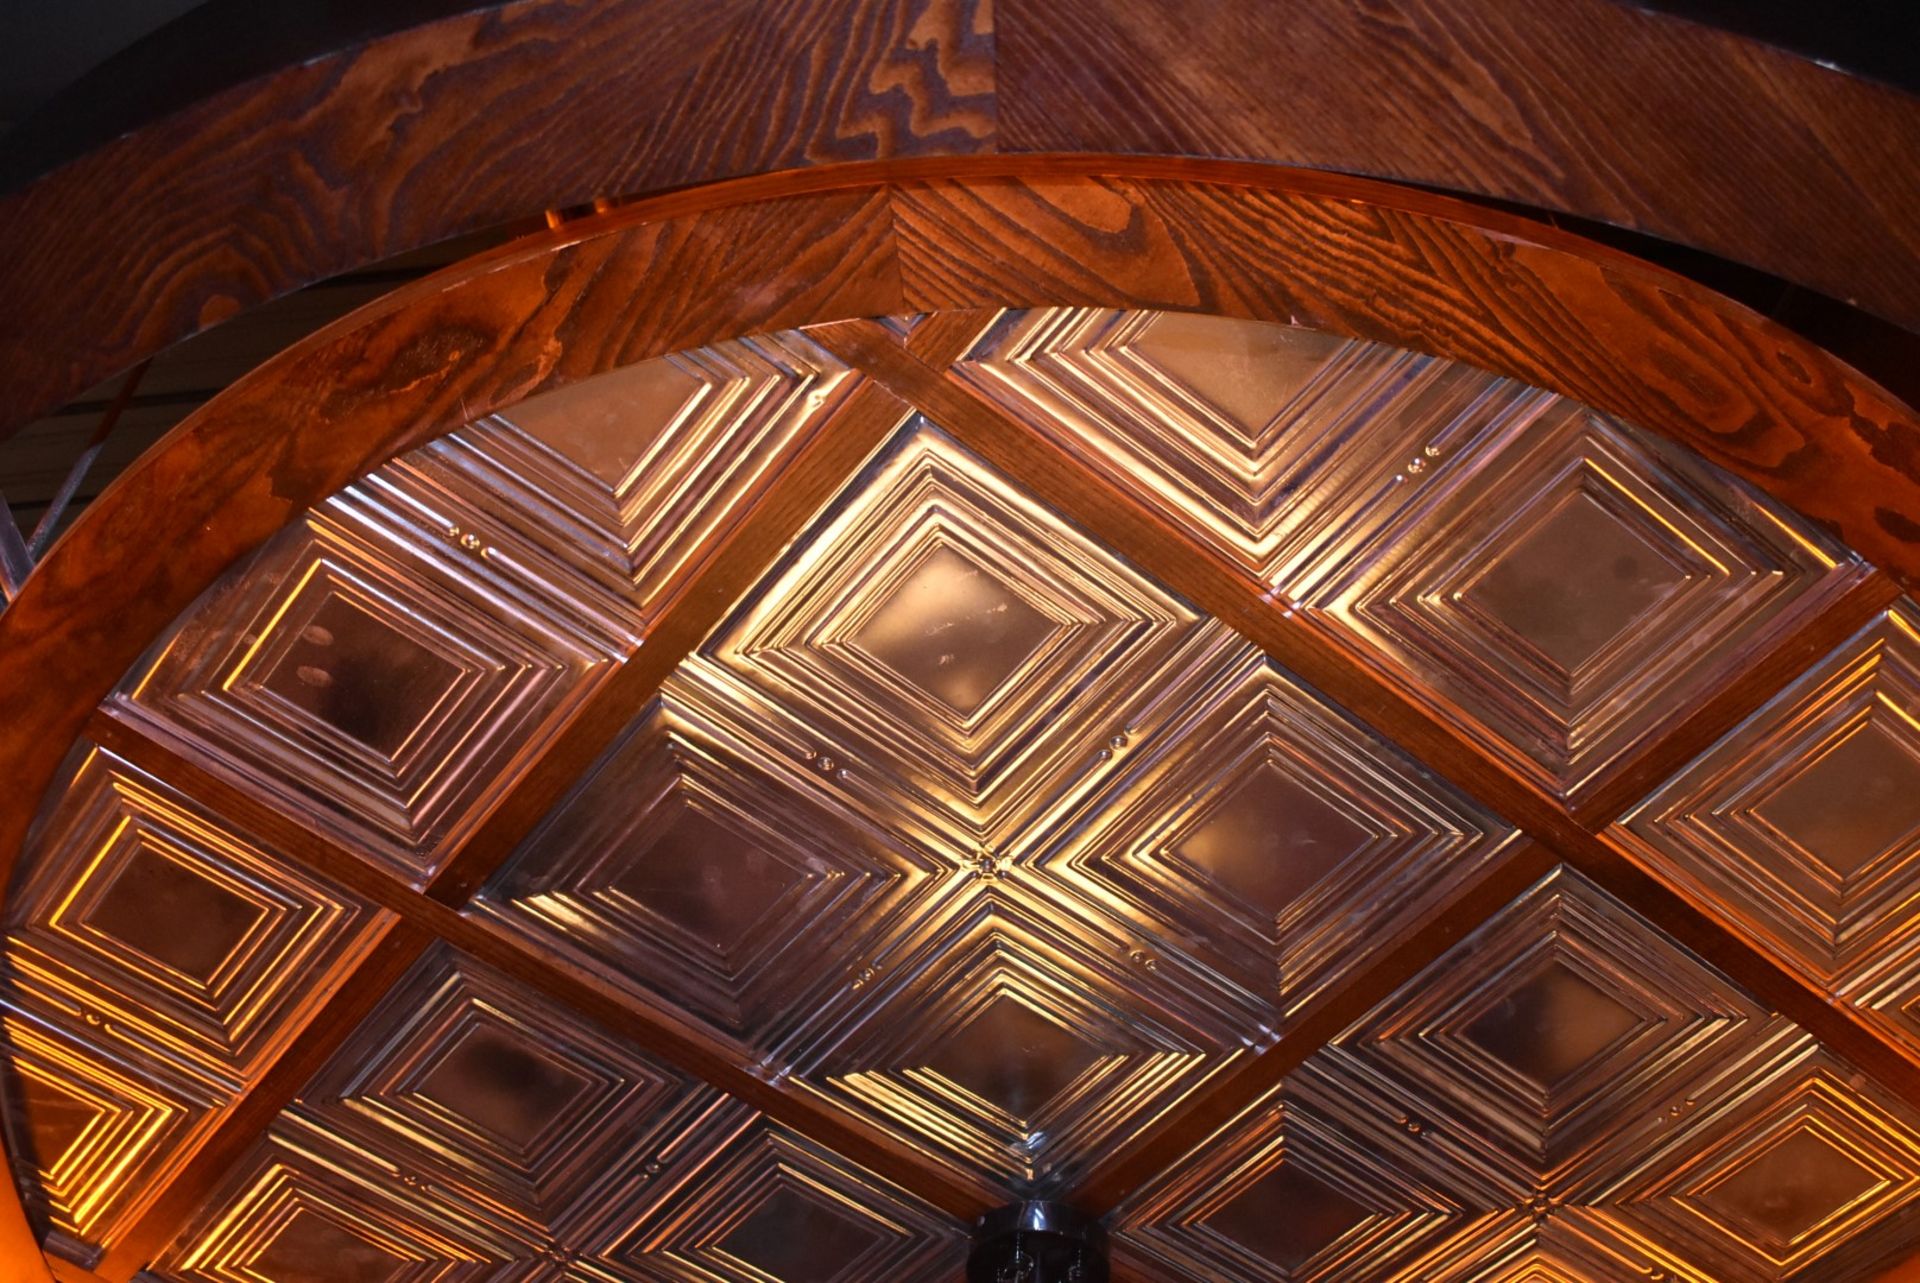 1 x Bespoke Suspended Round Ceiling Panel in Dark Wood With Panelling Inserts - Approx 2.6 Meter - Image 6 of 6